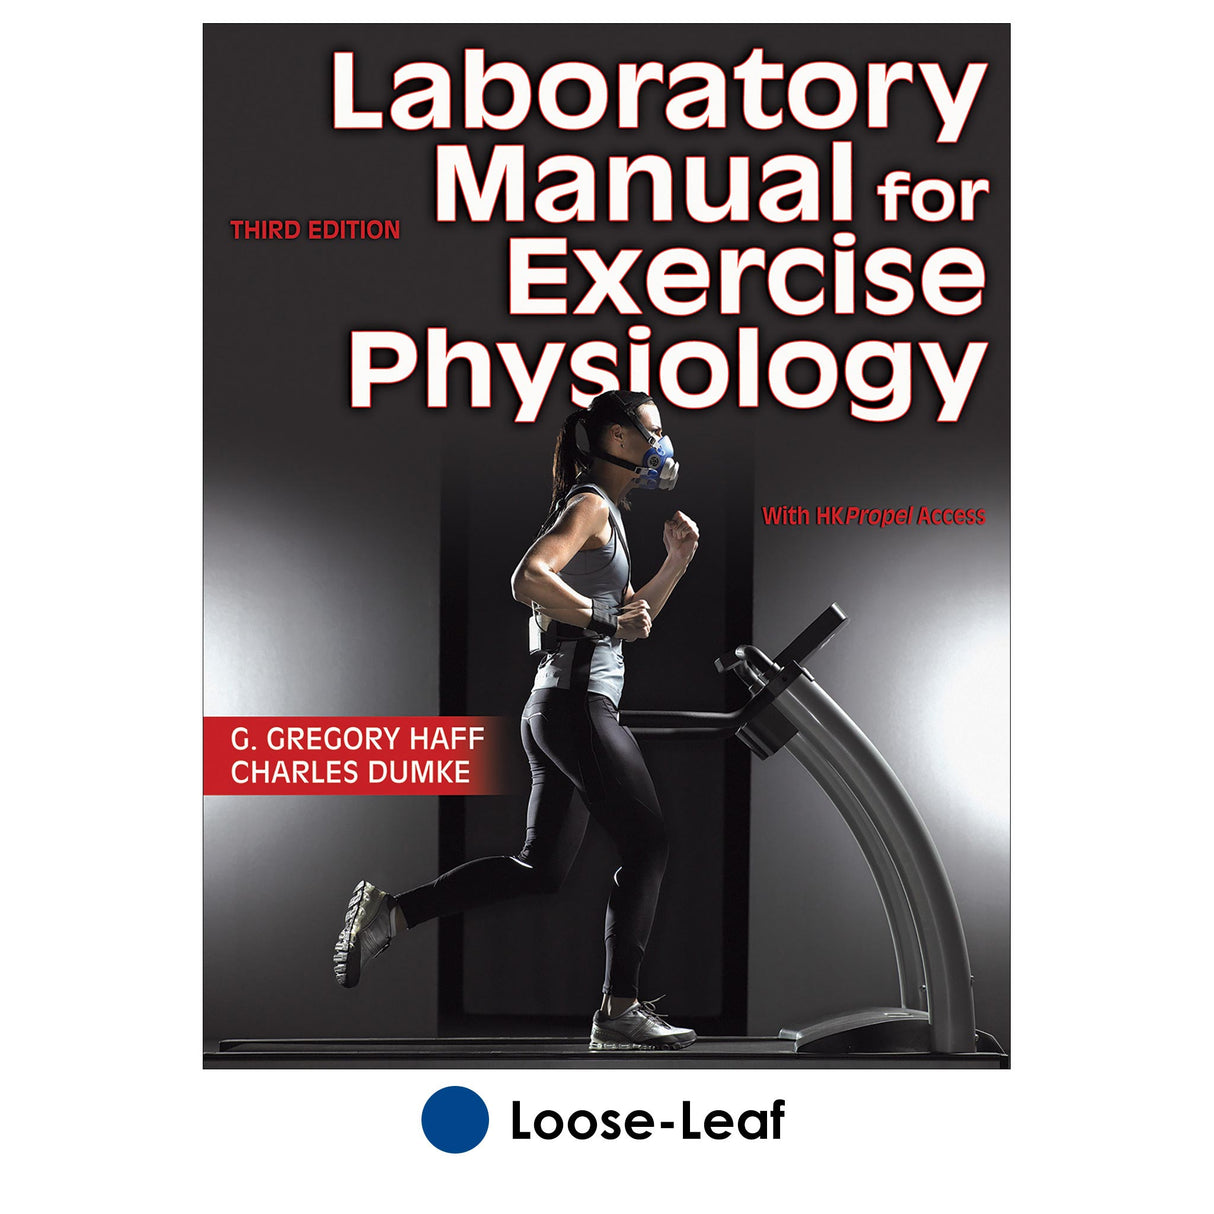 Laboratory Manual for Exercise Physiology 3rd Edition With HKPropel Access-Loose-Leaf Edition